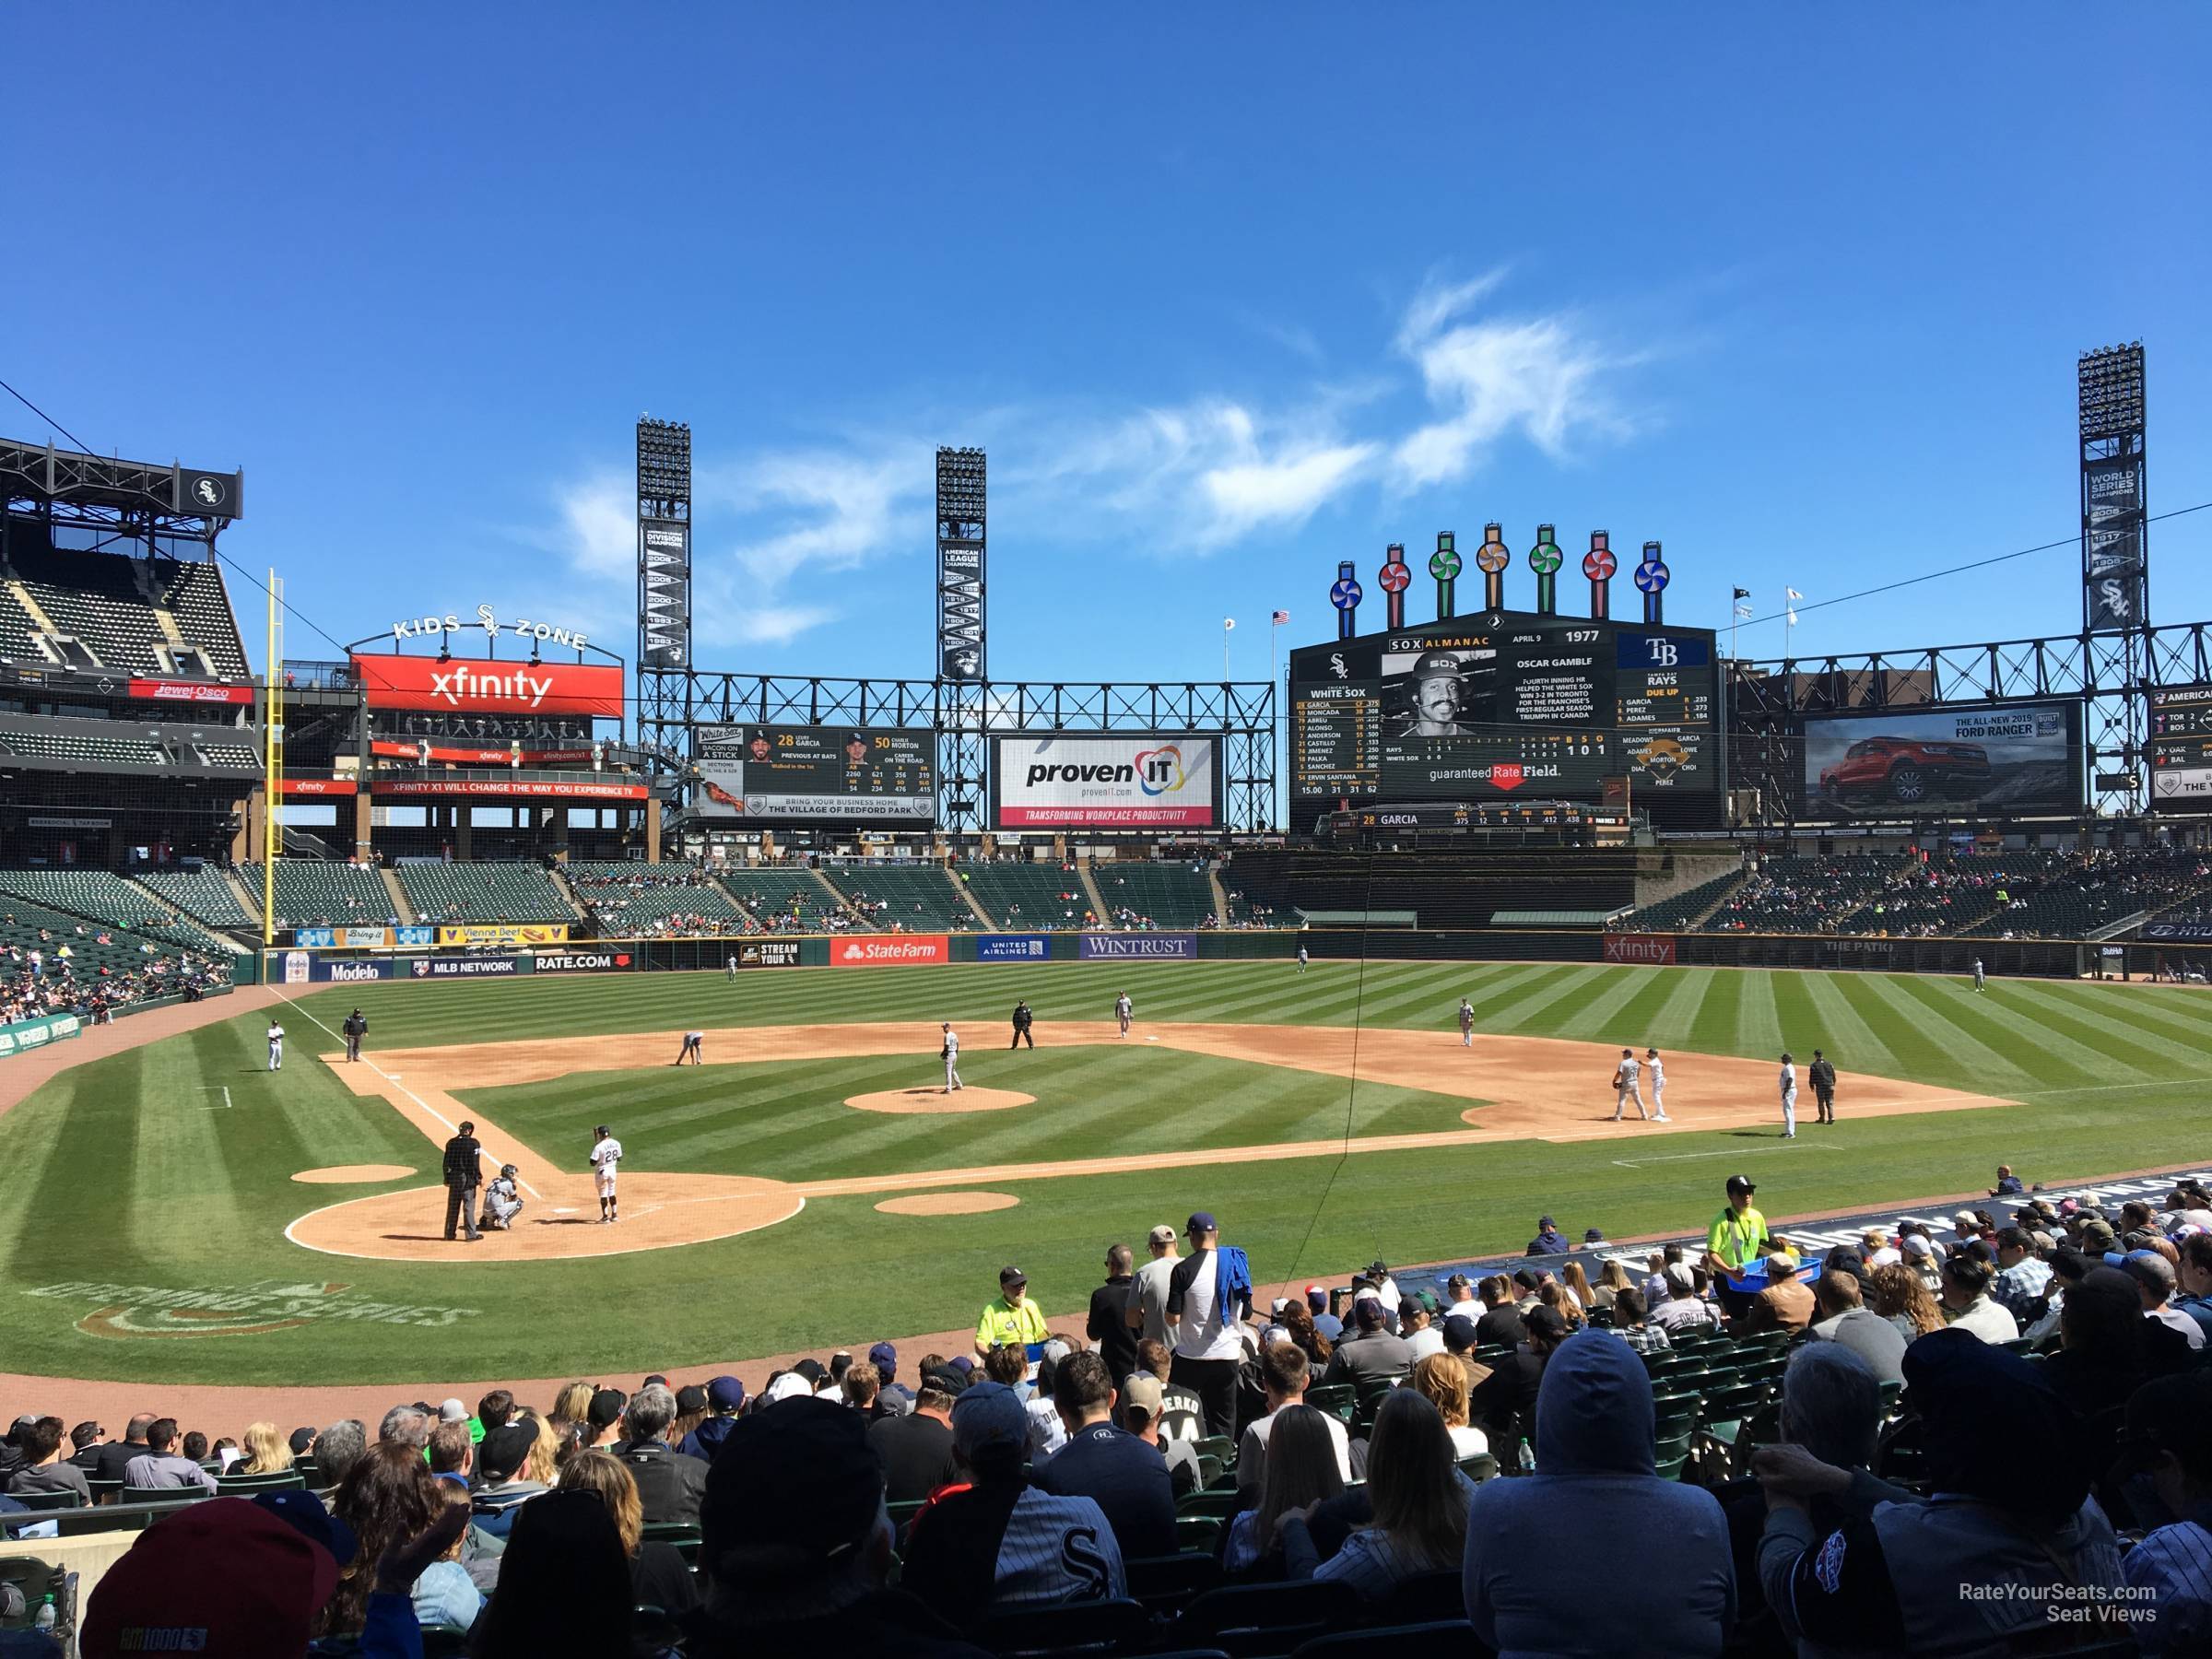 section 129, row 25 seat view  - guaranteed rate field